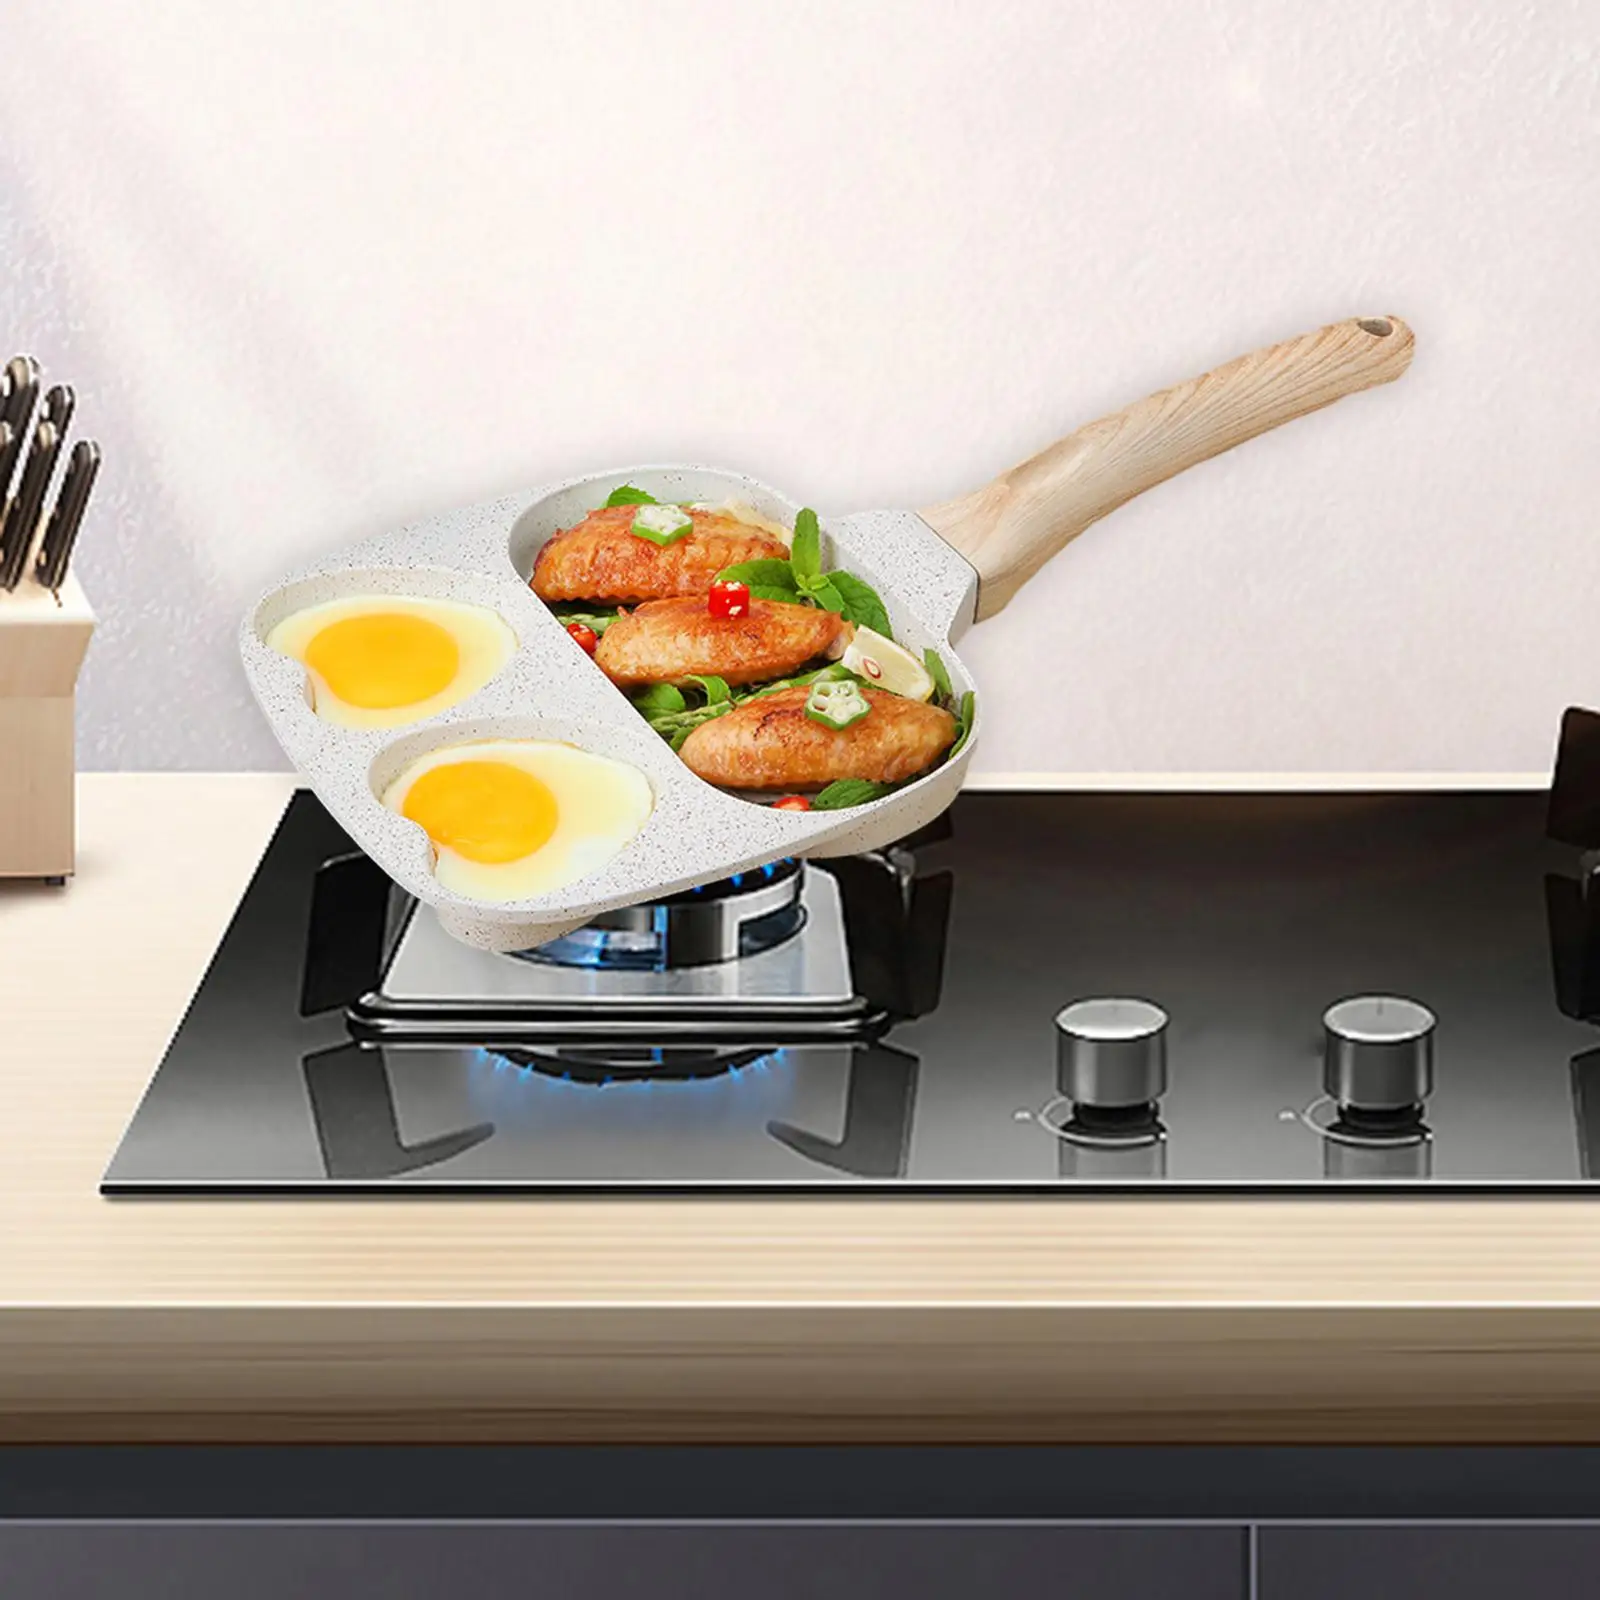 Egg Frying Pan Grill Pan Divided Multipurpose with Hanging Hole Kitchen Cooking Tool Egg Cooker Pan Bread Steak Egg